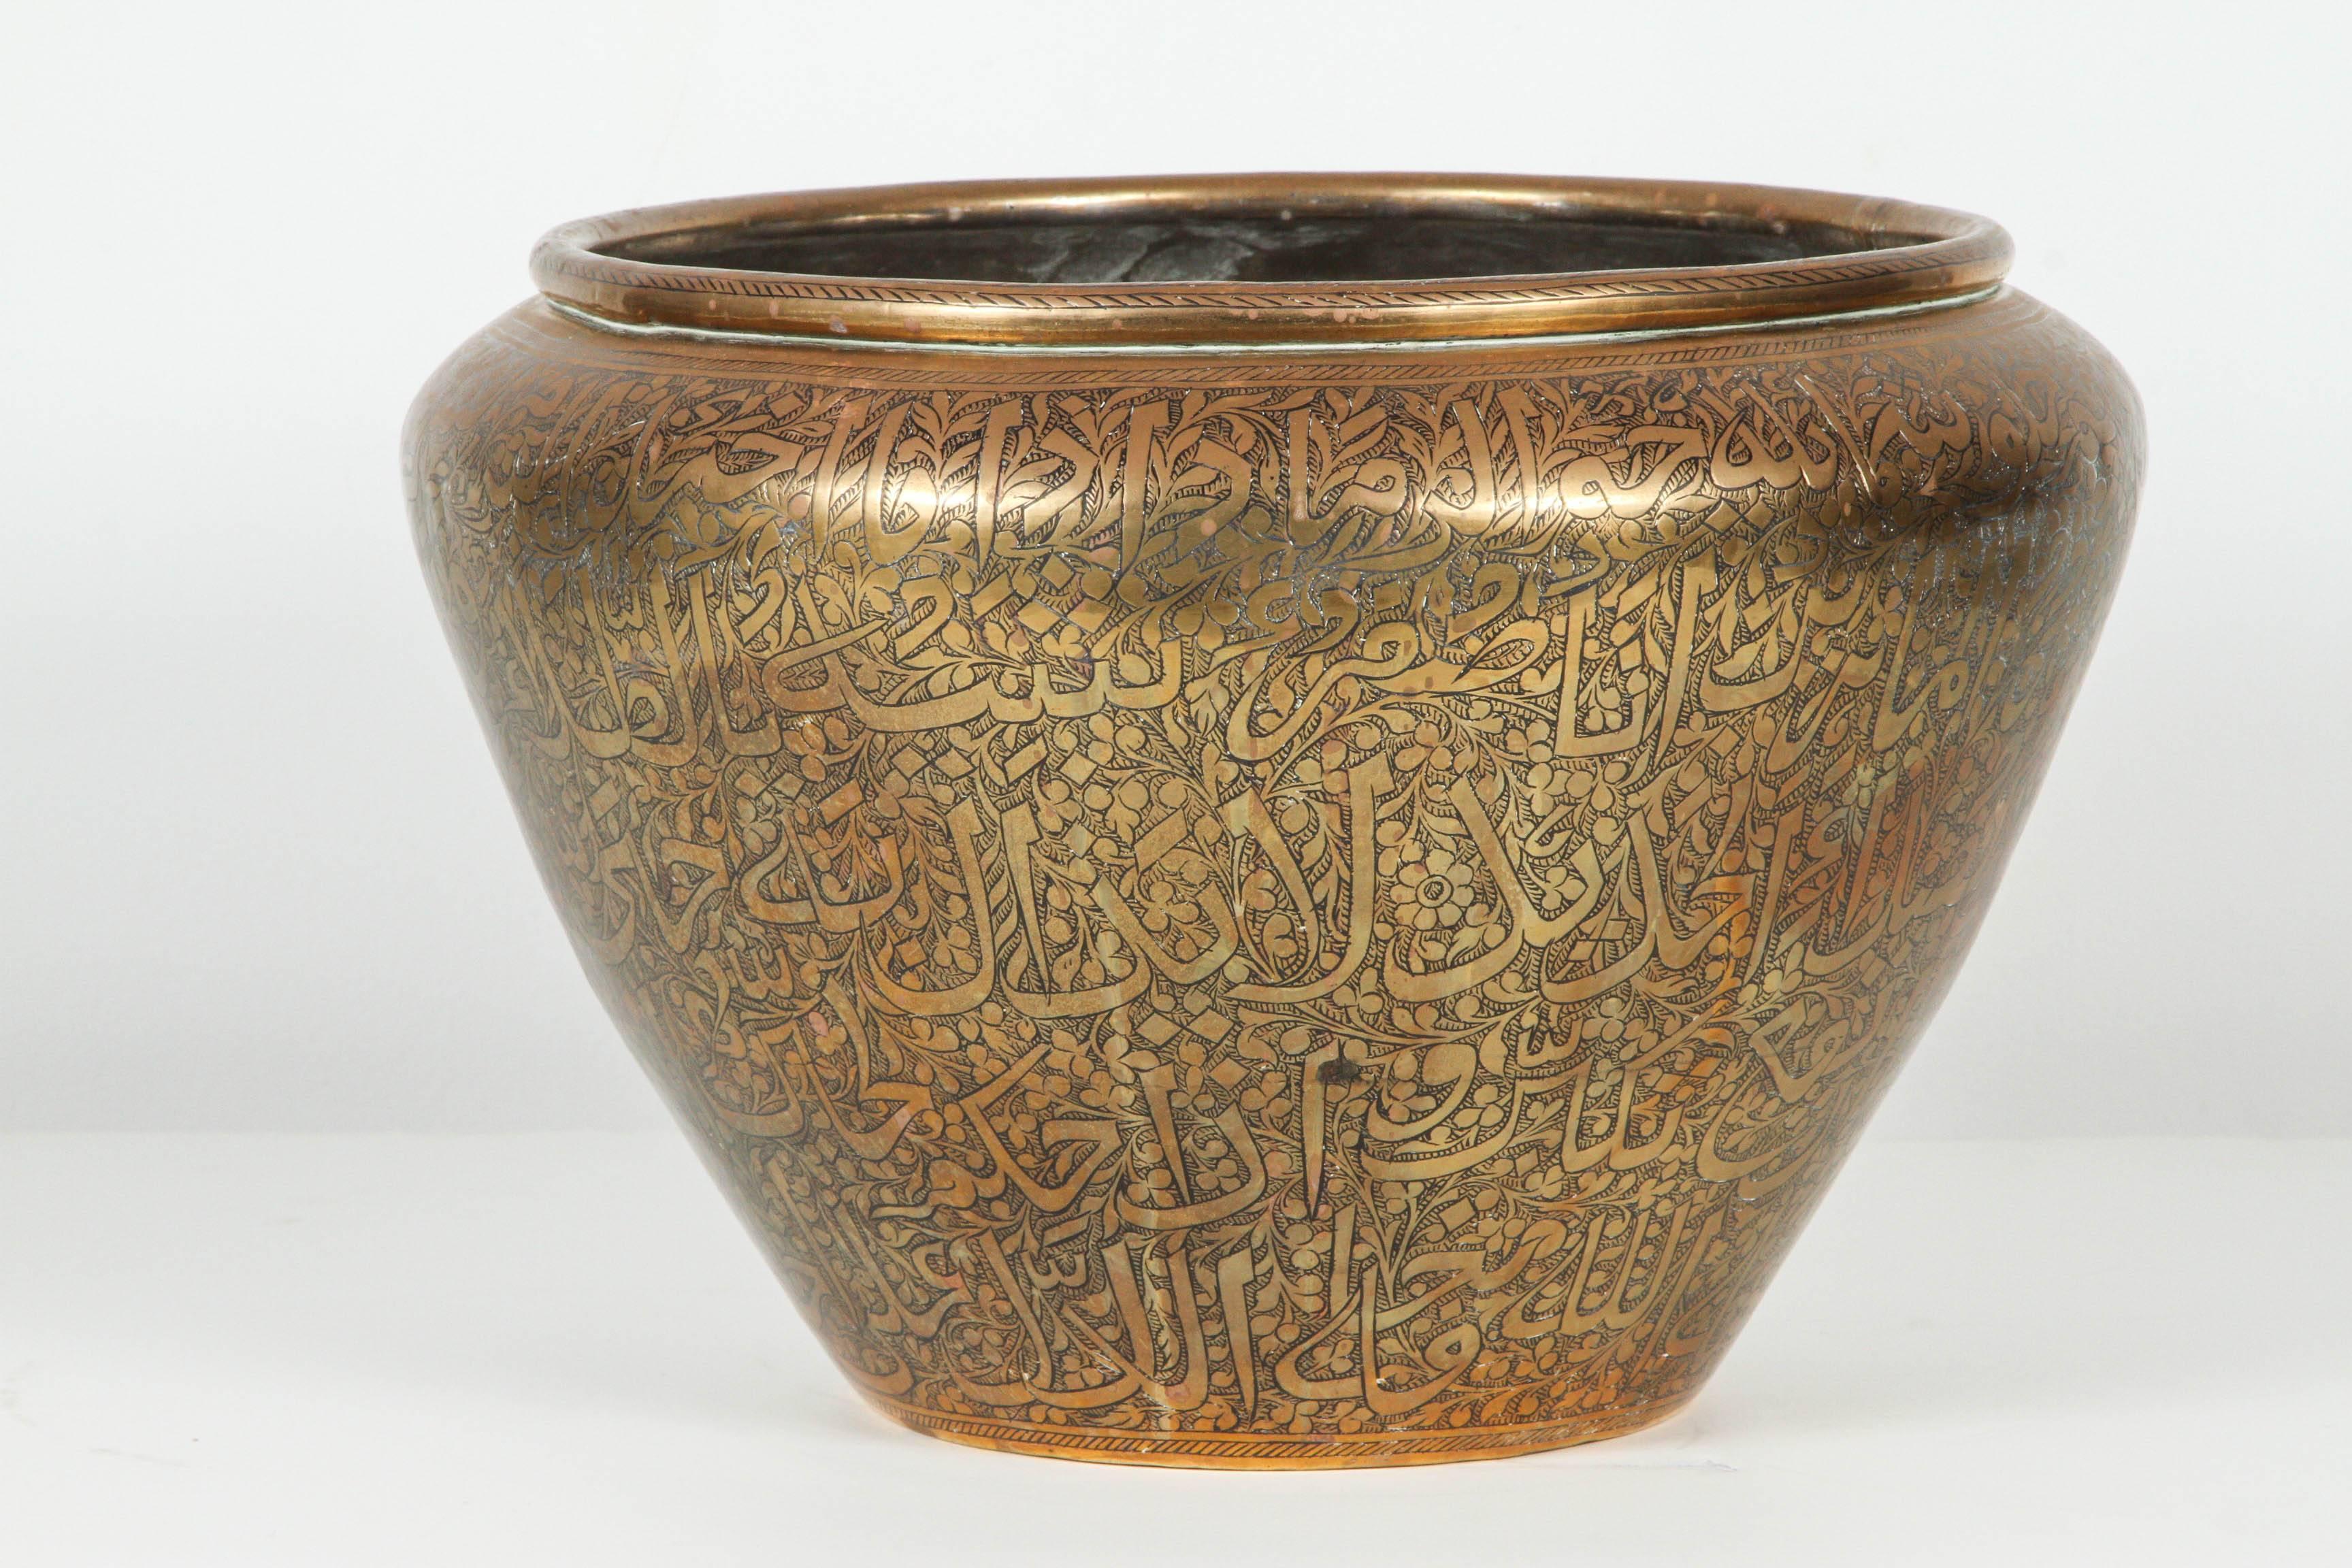 Very nice large brass pot with Arabic calligraphy writhing all over.
Middle Eastern hand-hetched and carved designs.